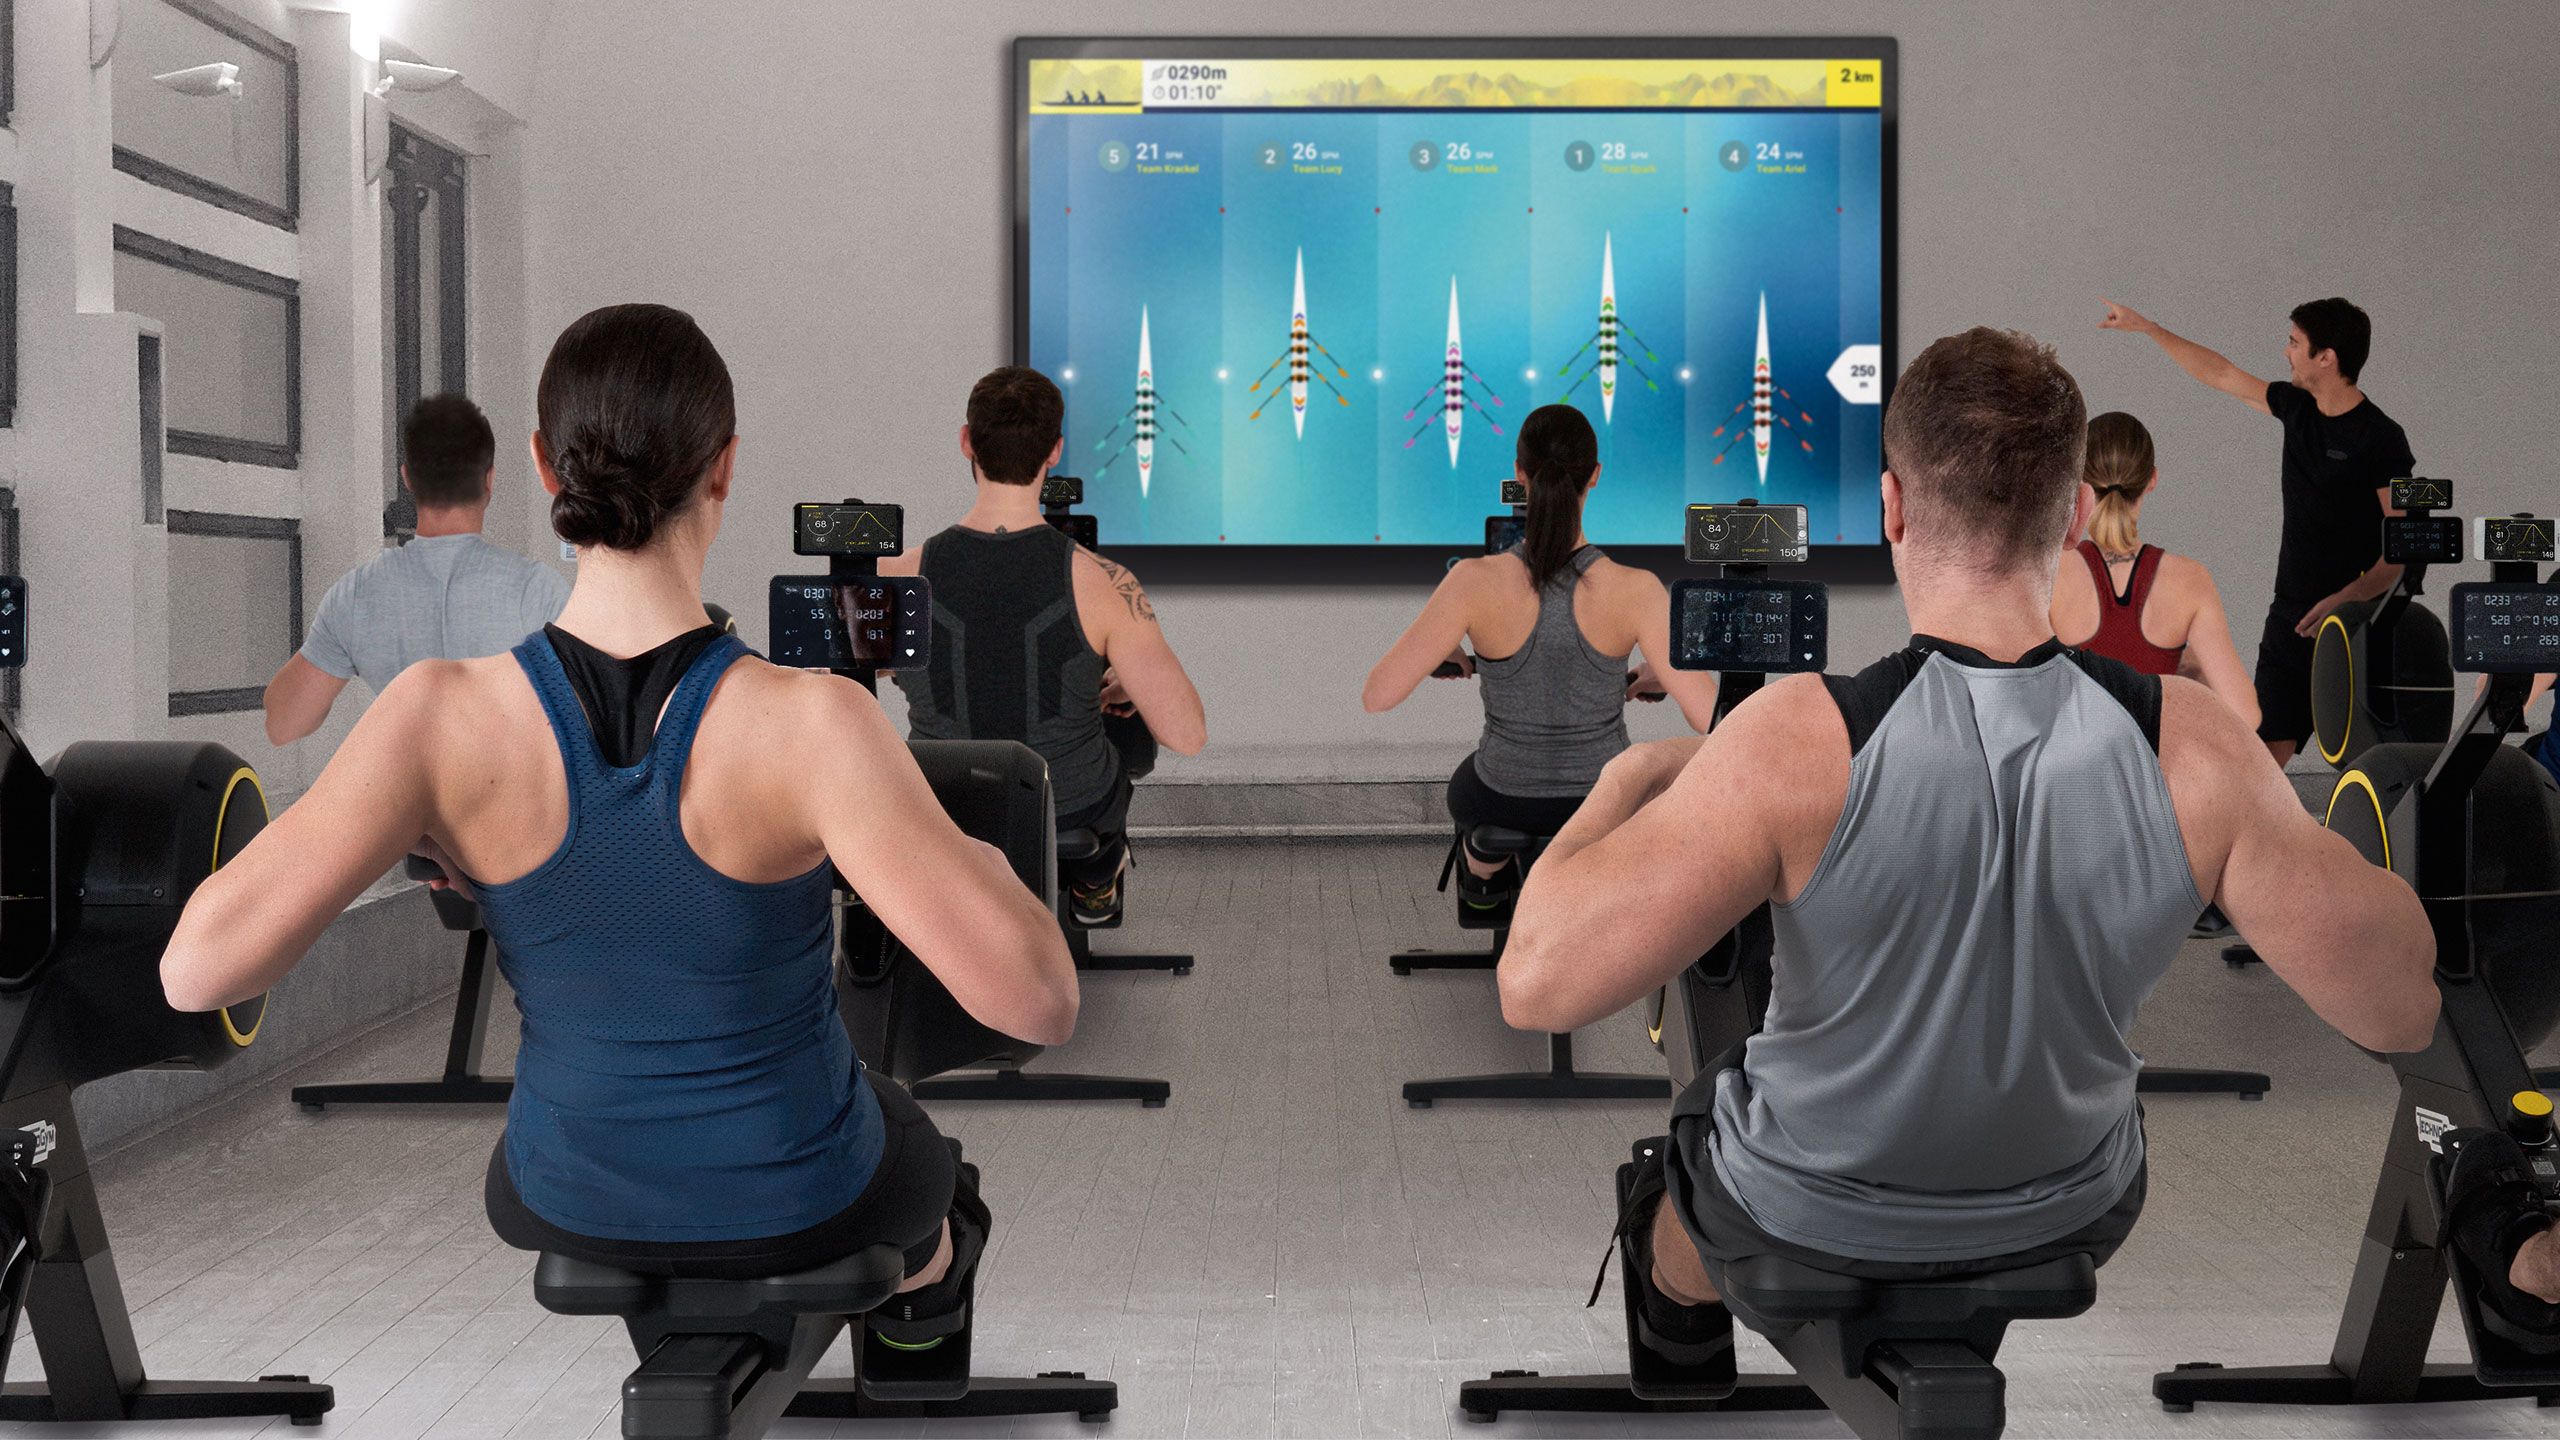 The signs that are being trained on Technogym Simulators. Celebrities who Train on Technogym Simulators. Пауэр класс